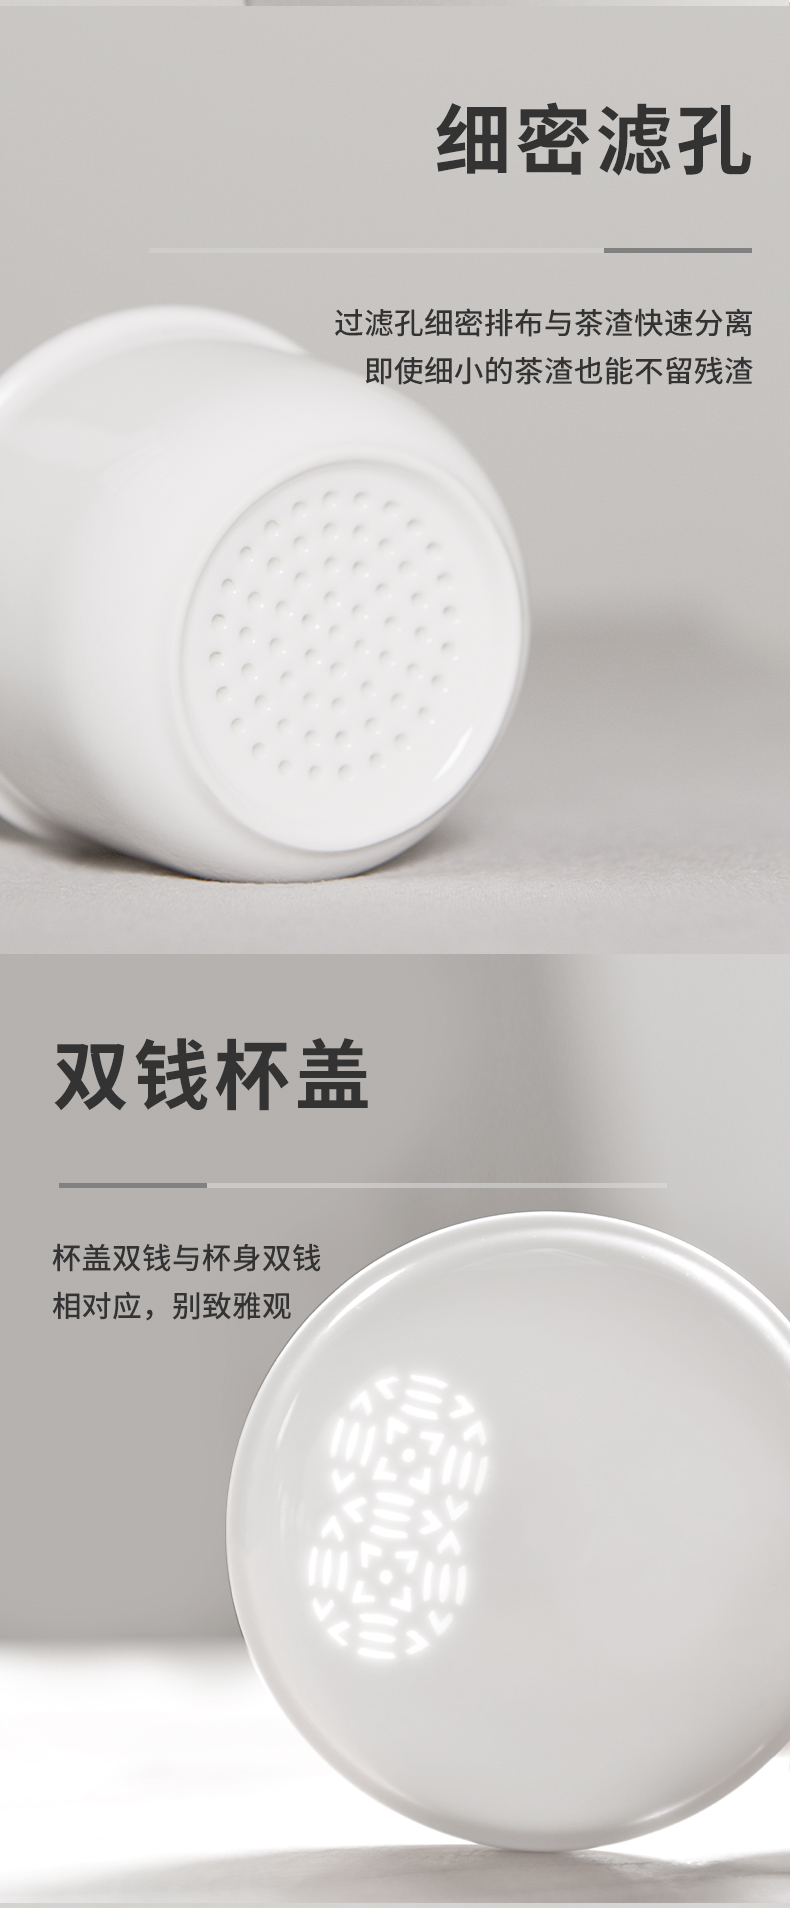 Jingdezhen ceramic tea cups to separate office linglong cup with cover filter cup white porcelain cup tea cup